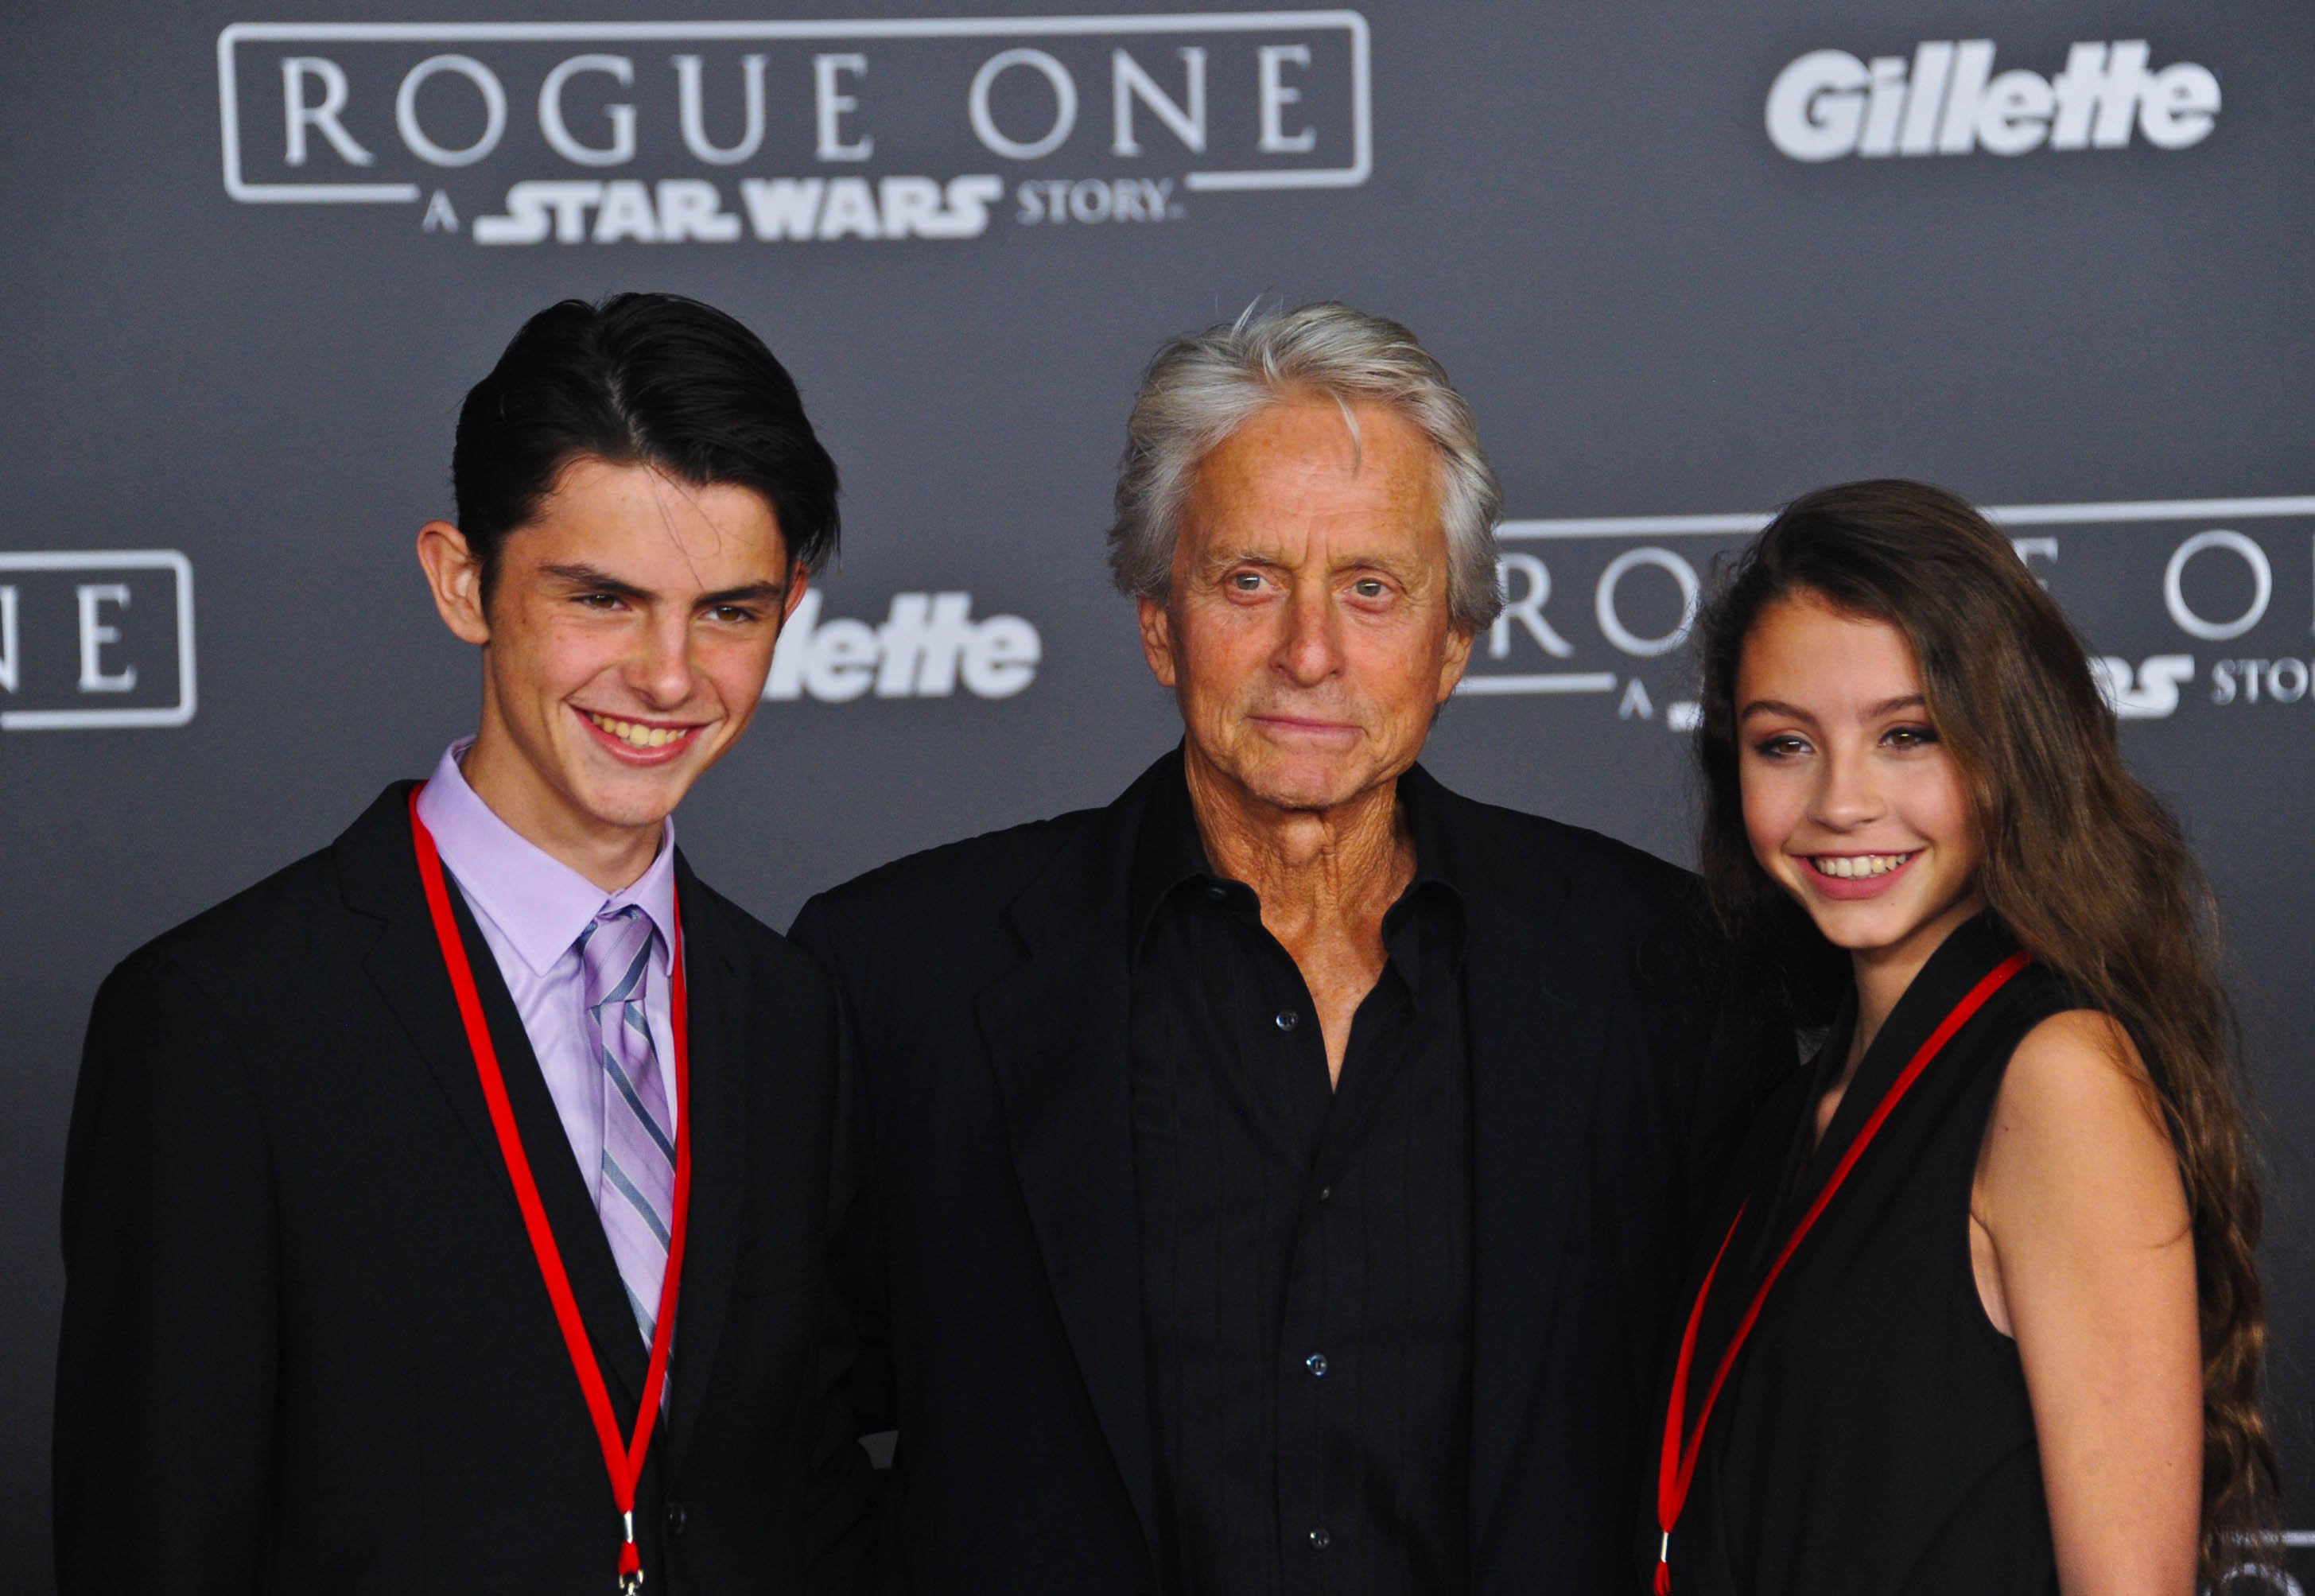 Michael Douglas with children Dylan and Carys Douglas attend the 2016 premiere of "Rogue One: A Star Wars Story" at the Pantages Theatre in California. | Photo: Getty Images